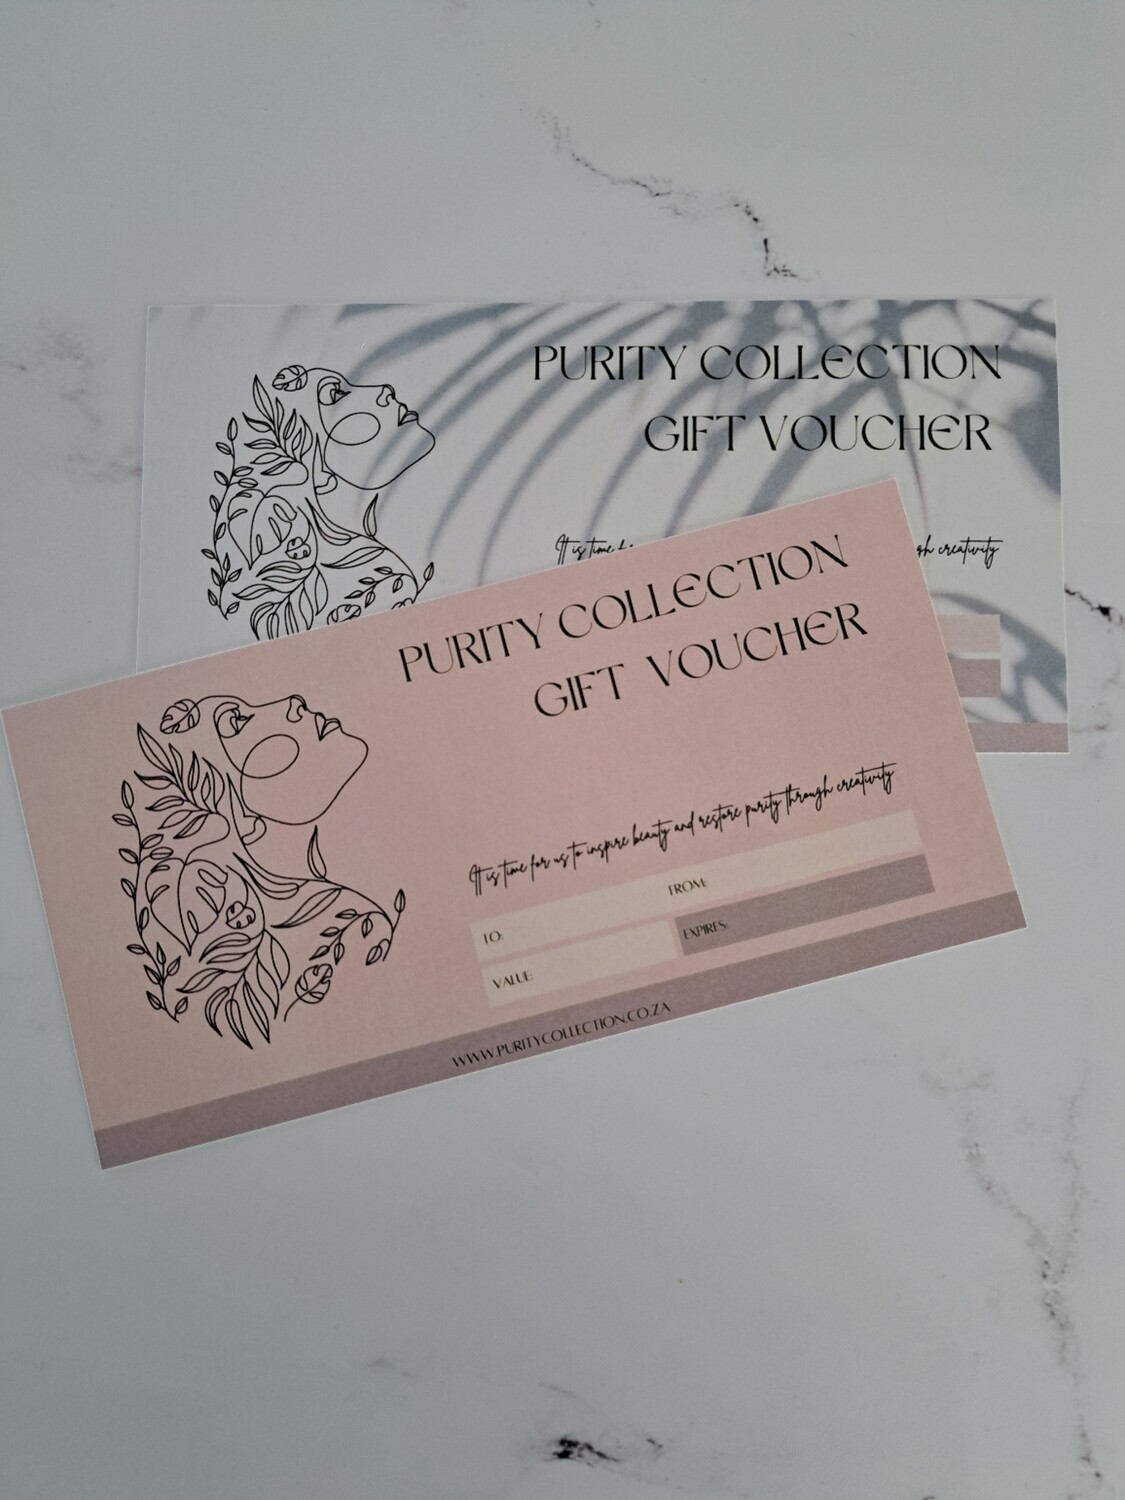 Purity Collection Voucher